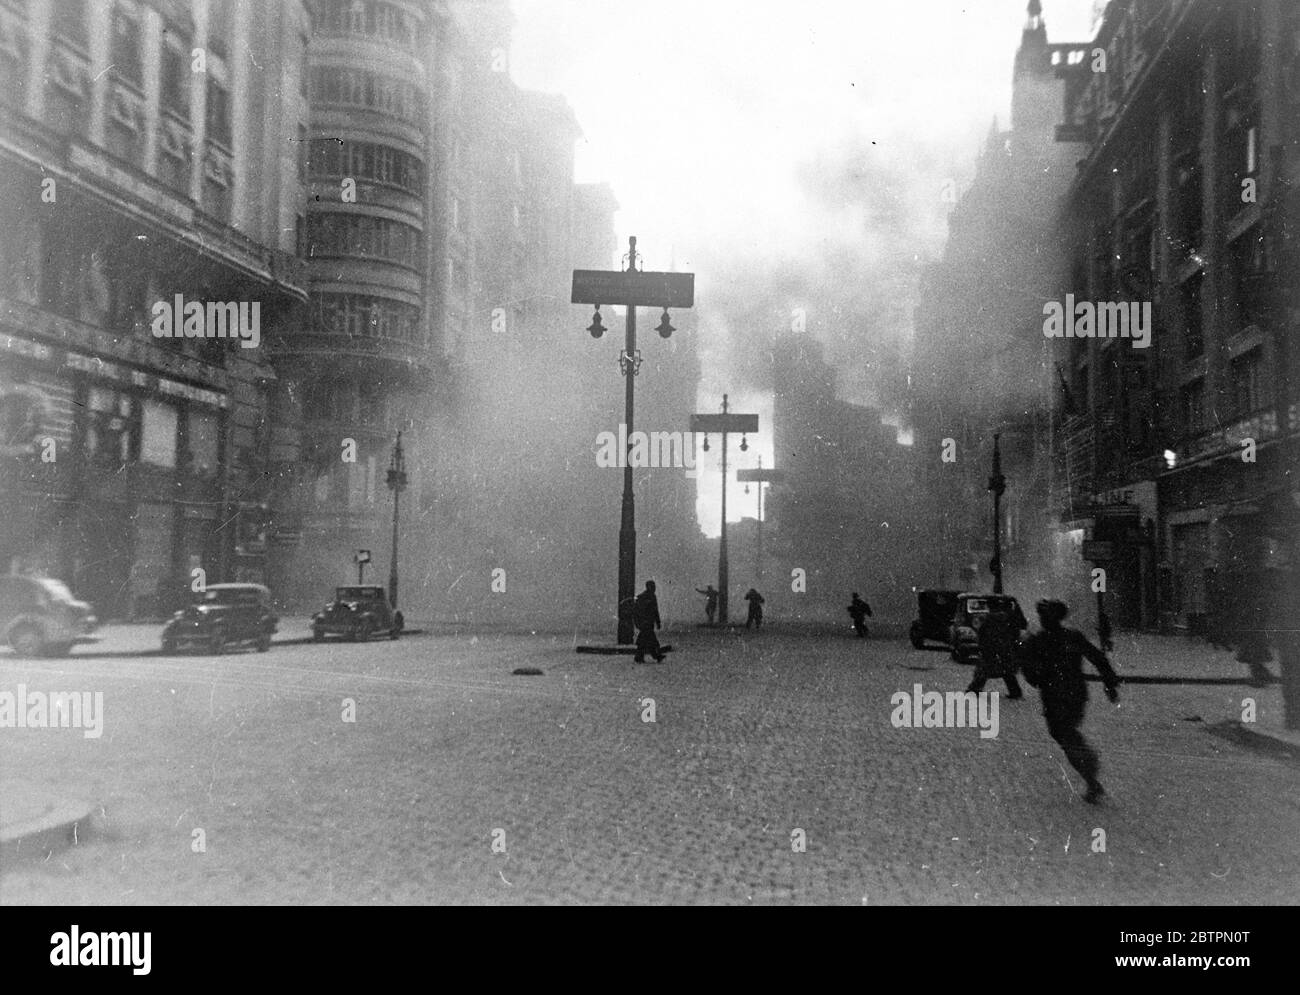 Madrid again under fire. Shell that killed three, injured 15. British women MPs in danger. This picture just received in London from Madrid, was taken by photographer in an ambulance as rebel bombs and shells rained down in the intense bombardment which the rebels are again directing on the city. People can be seen running for their lives in the Gran Via, Madrid street, as a shell hits a building on the right. This shell killed three persons and injured 15. The people running in the centre were caught by the explosion and badly hurt. This bombardment also endangered the lives of the Duchess of Stock Photo